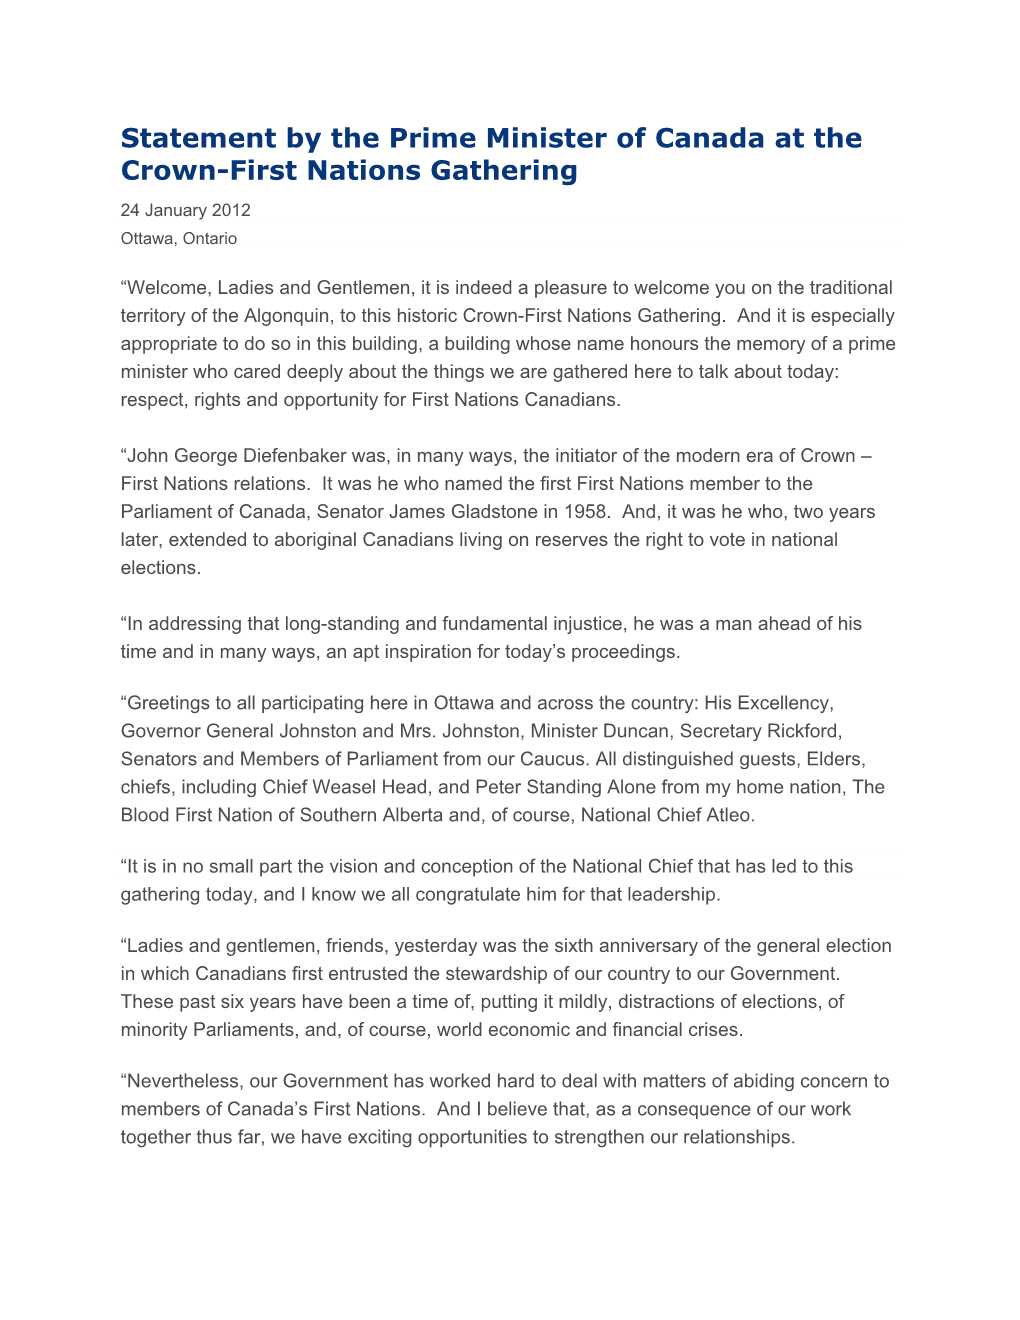 Statement by the Prime Minister of Canada at the Crown-First Nations Gathering 24 January 2012 Ottawa, Ontario